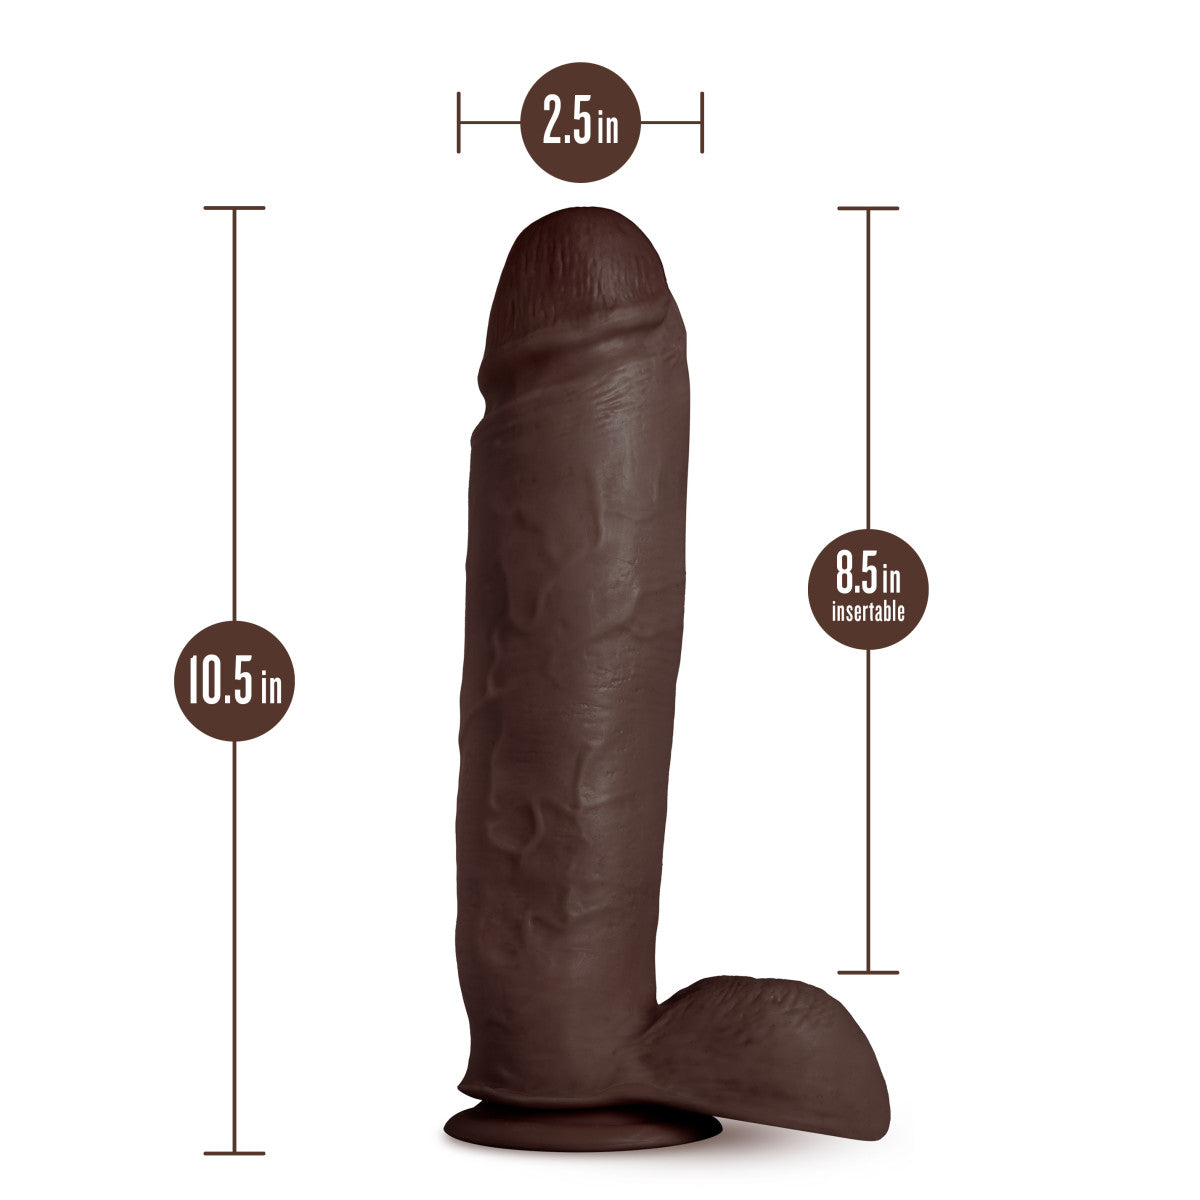 Au Naturel Huge Realistic Chocolate 10.5-Inch Long Dildo With Balls & Suction Cup Base